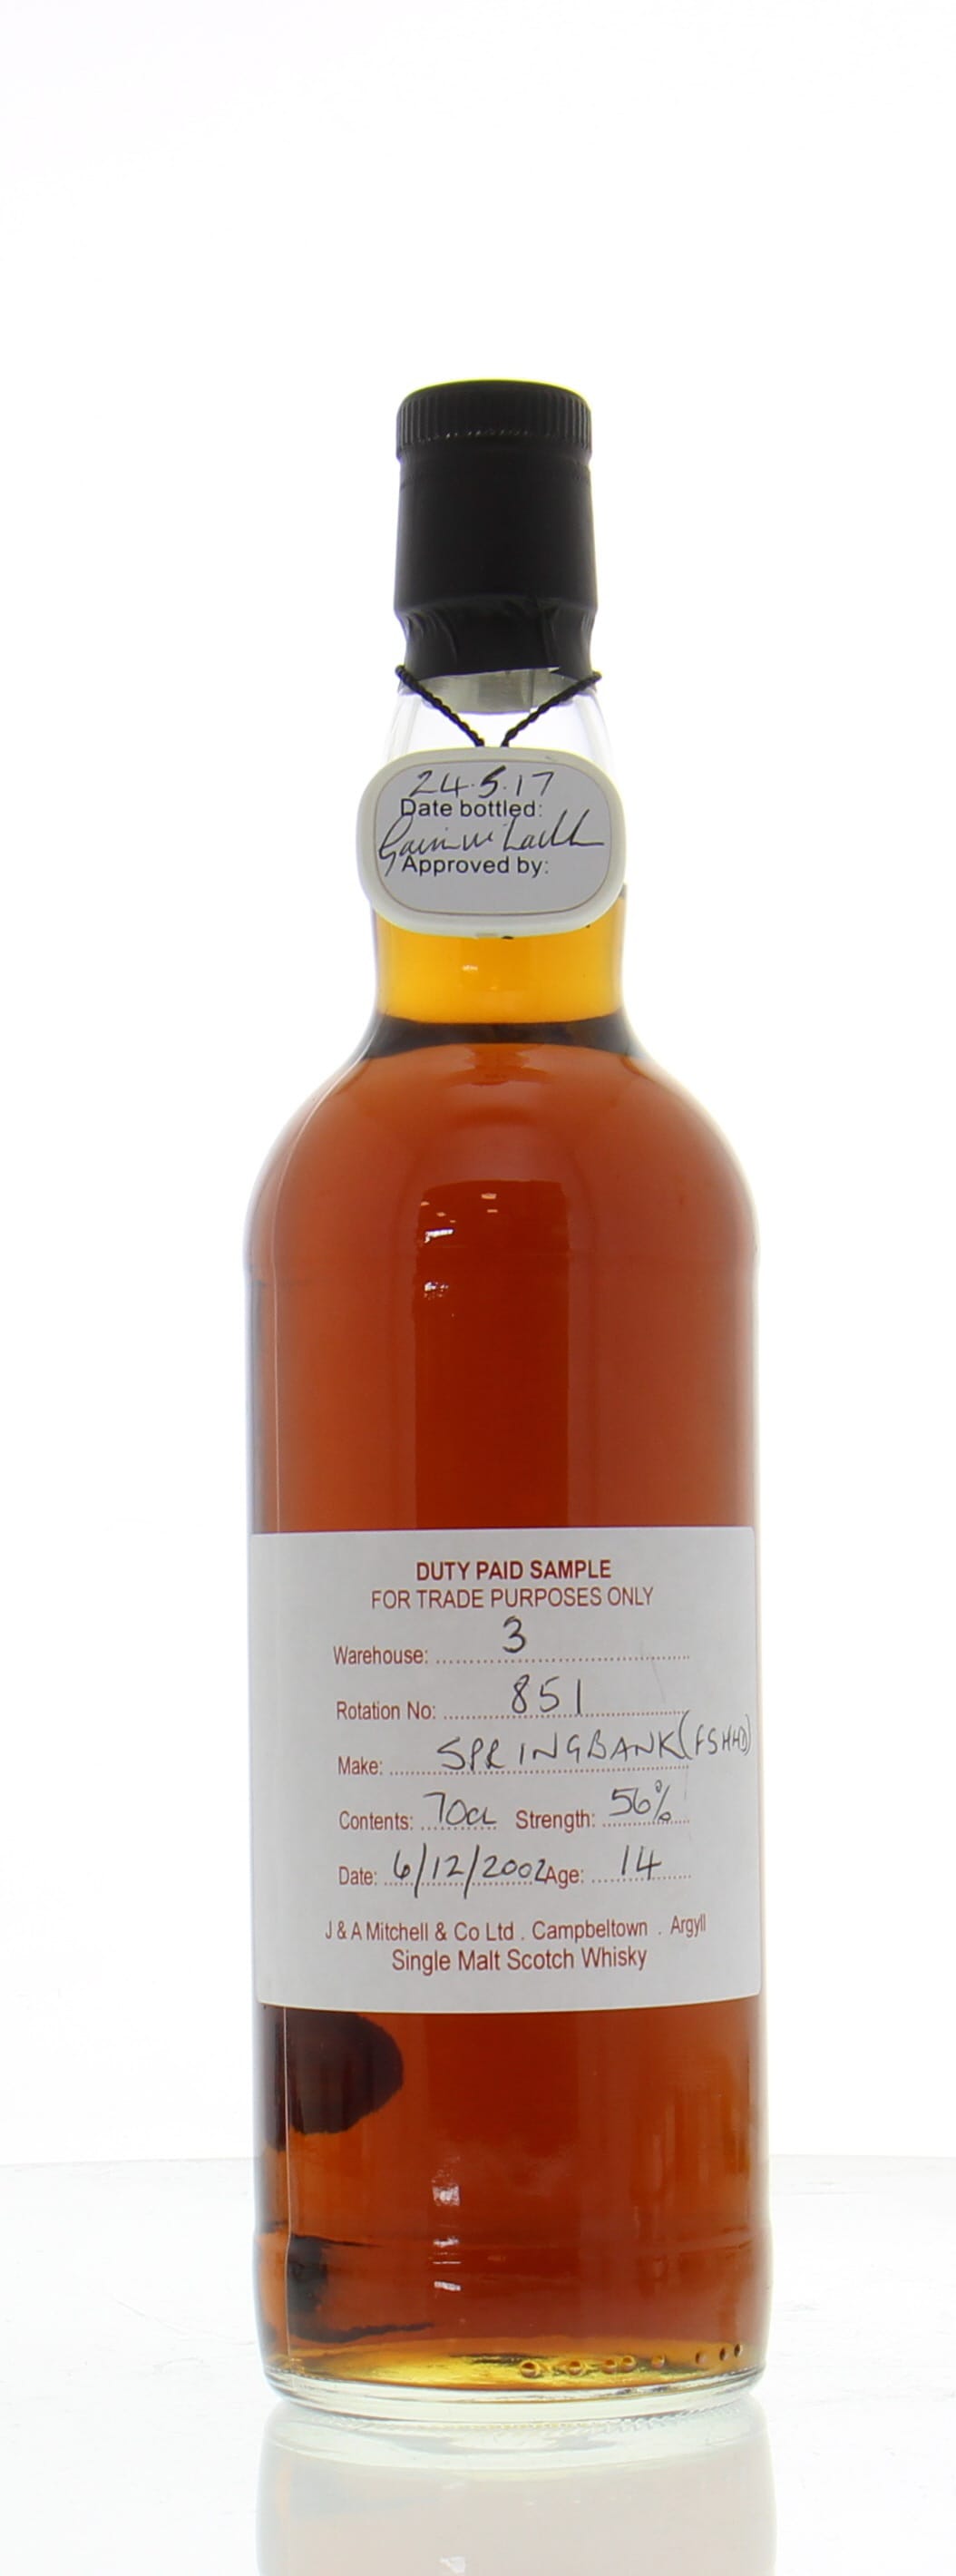 Springbank - 14 Years Old Duty Paid Sample Warehouse 3 Rotation 851 56% 2002 Perfect